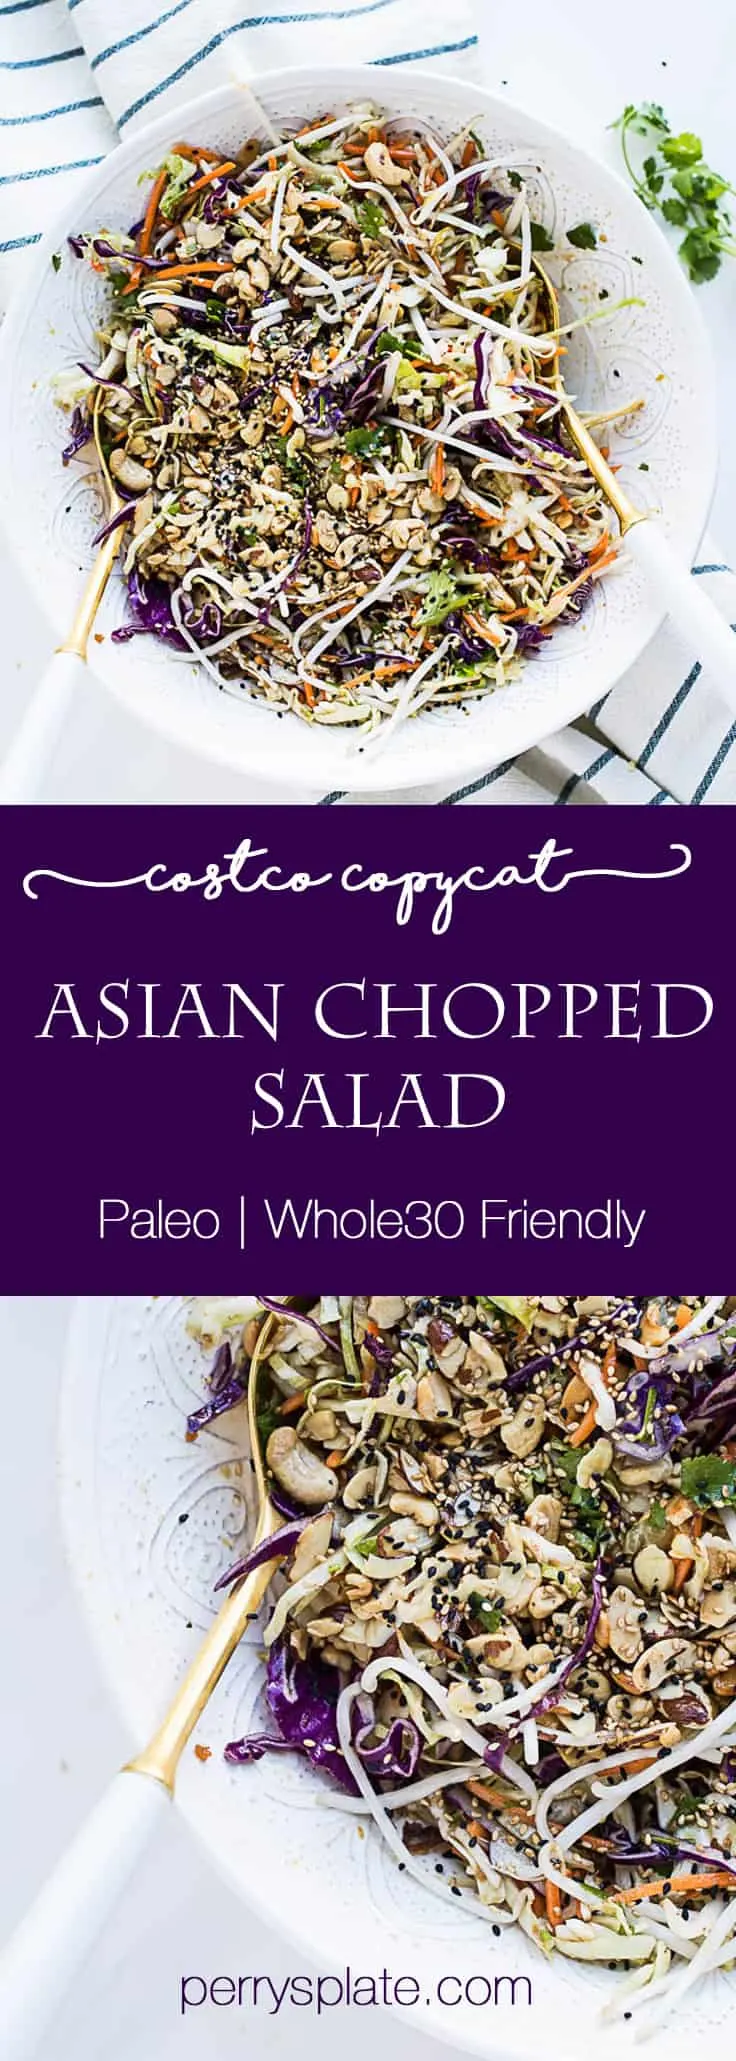 Paleo & Whole30 Asian Chopped Salad -- a fresh, healthy copycat of the salad kit found at Costco! | Whole30 salad recipes | paleo recipes | vegetarian recipes | perrysplate.com